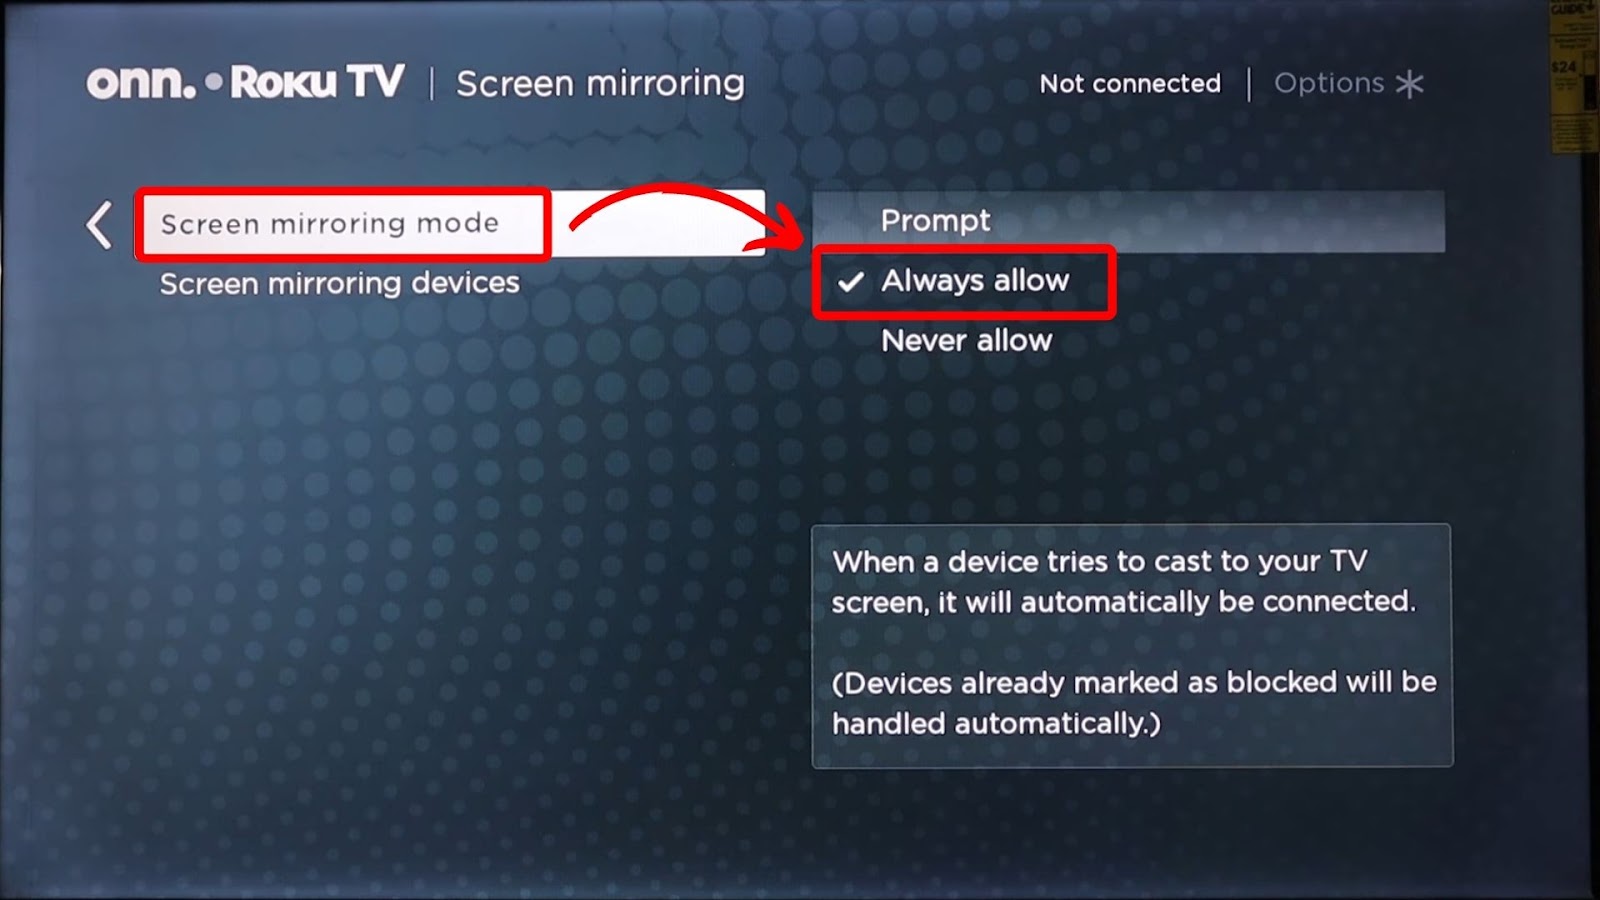 Enable the Screen Mirroring option in your Roku device